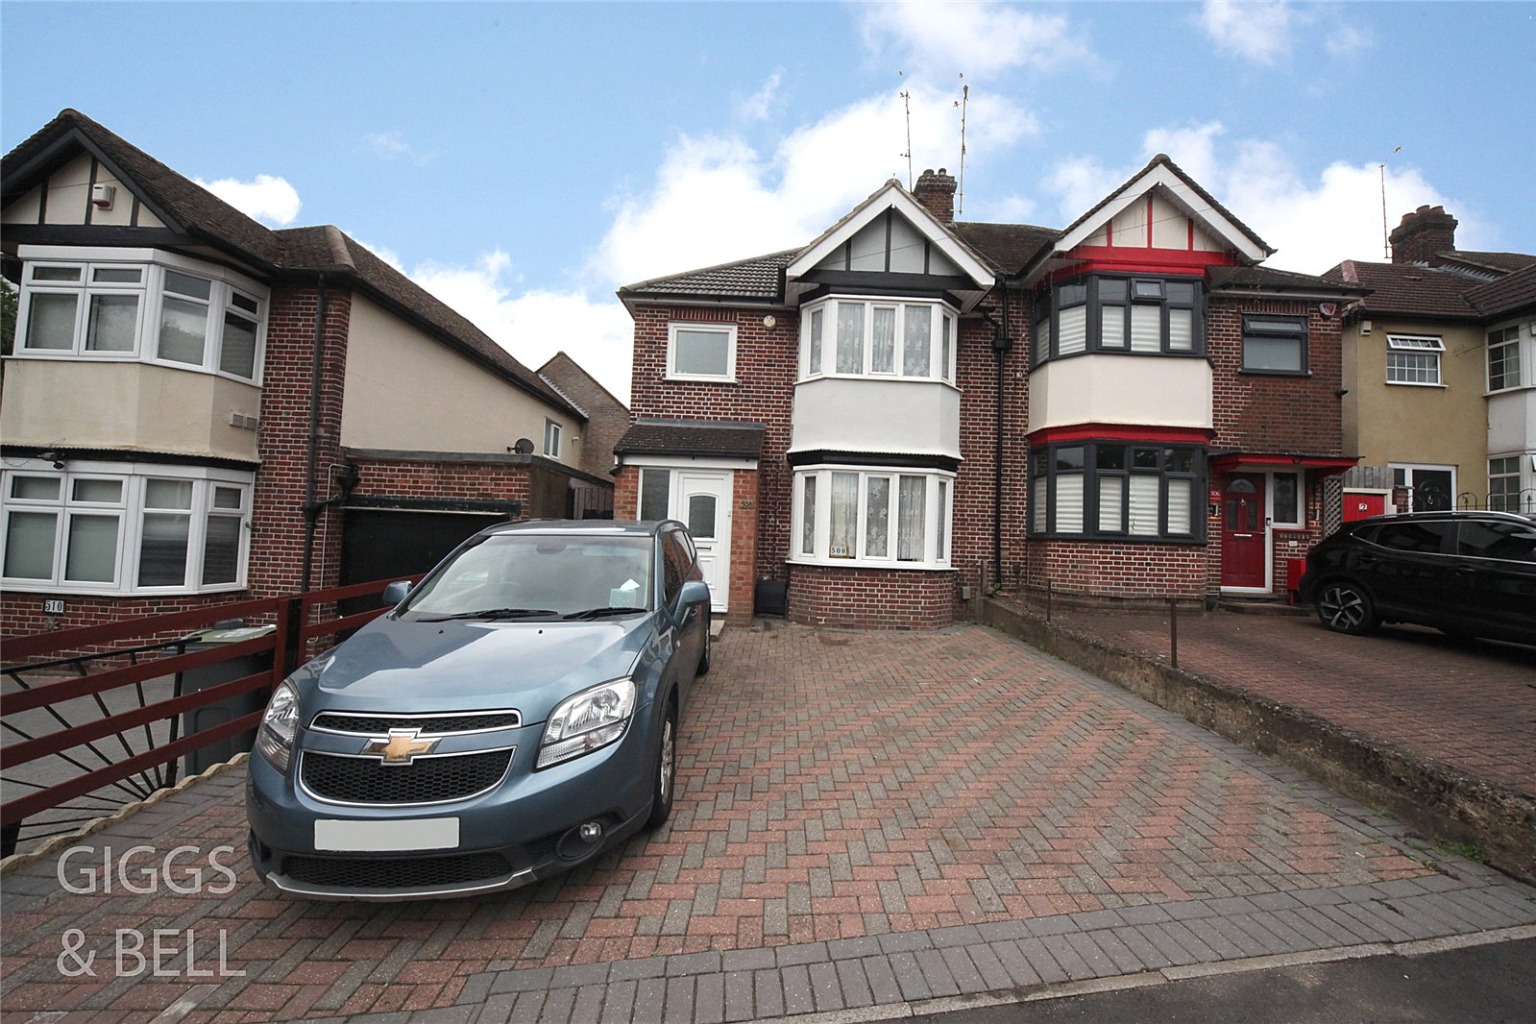 3 bed semi-detached house for sale - Property Image 1